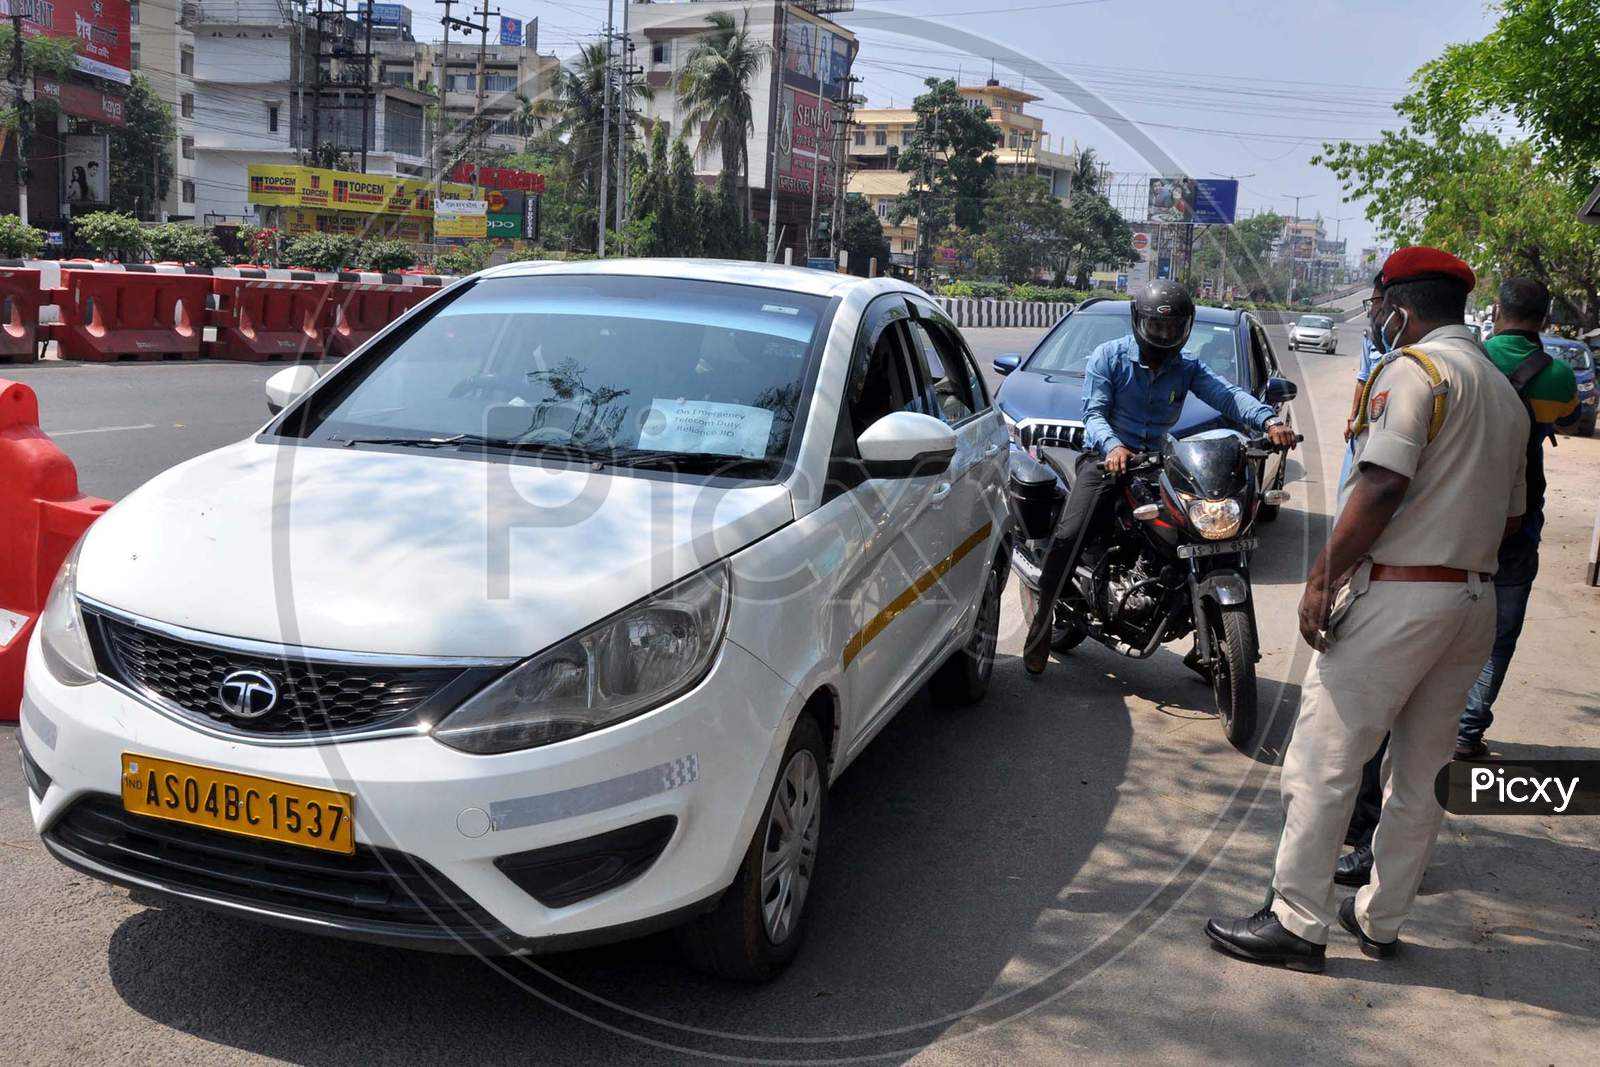 Police Personnel Question Commuters Who Defied Curfew During A 21-Day Nationwide Lockdown, In The Wake Of Coronavirus Pandemic, In Guwahati  On  Wednesday, March 25, 2020